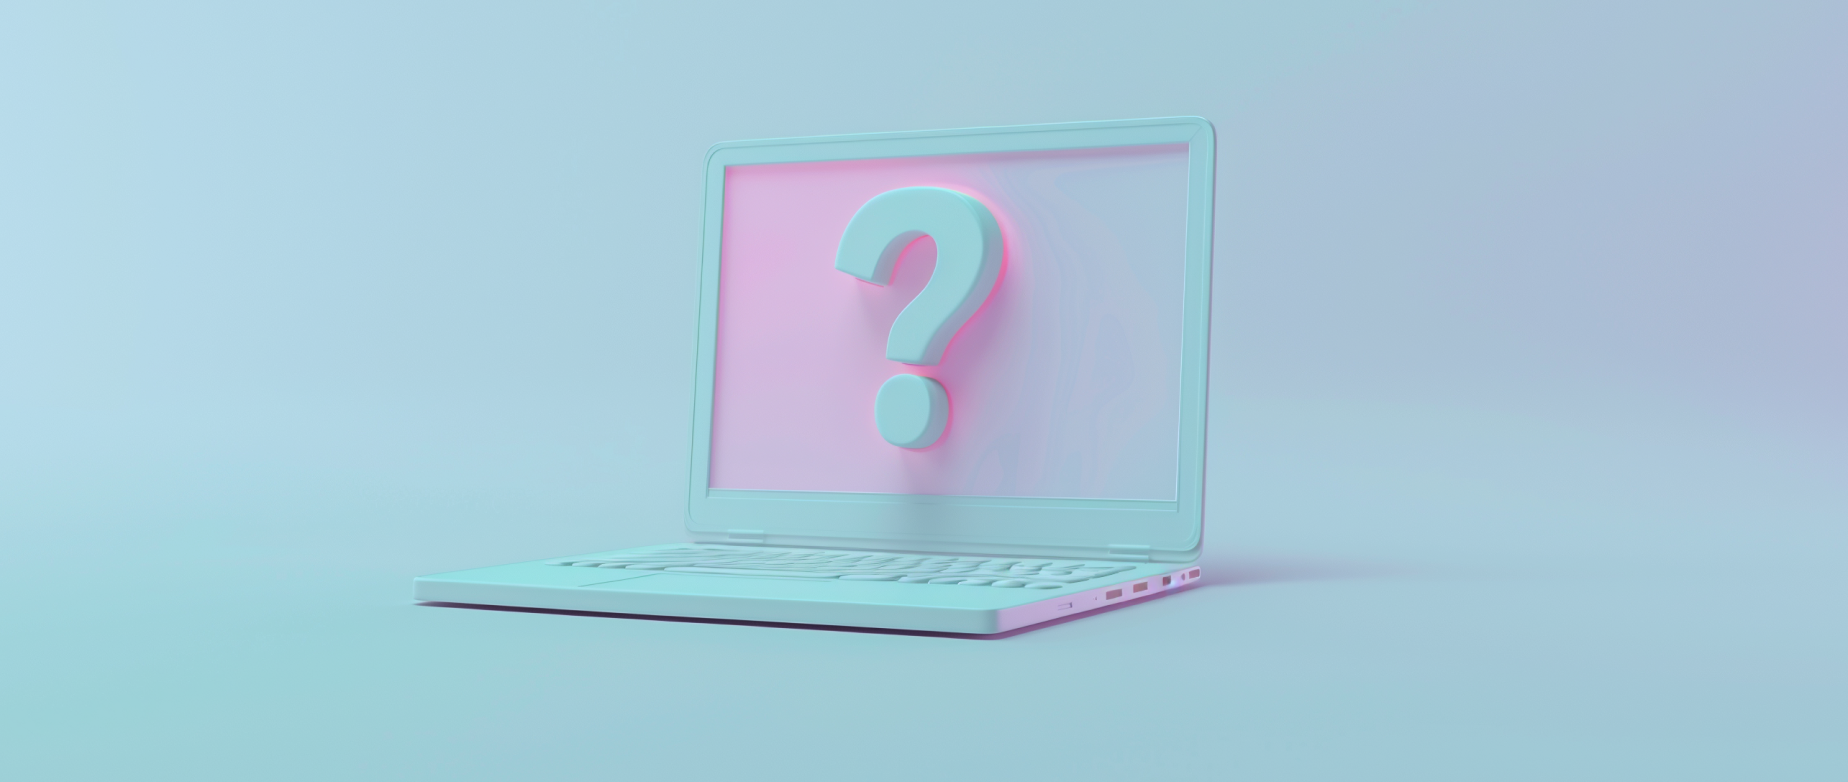 An open laptop with a pink screen and question mark on a light blue background.